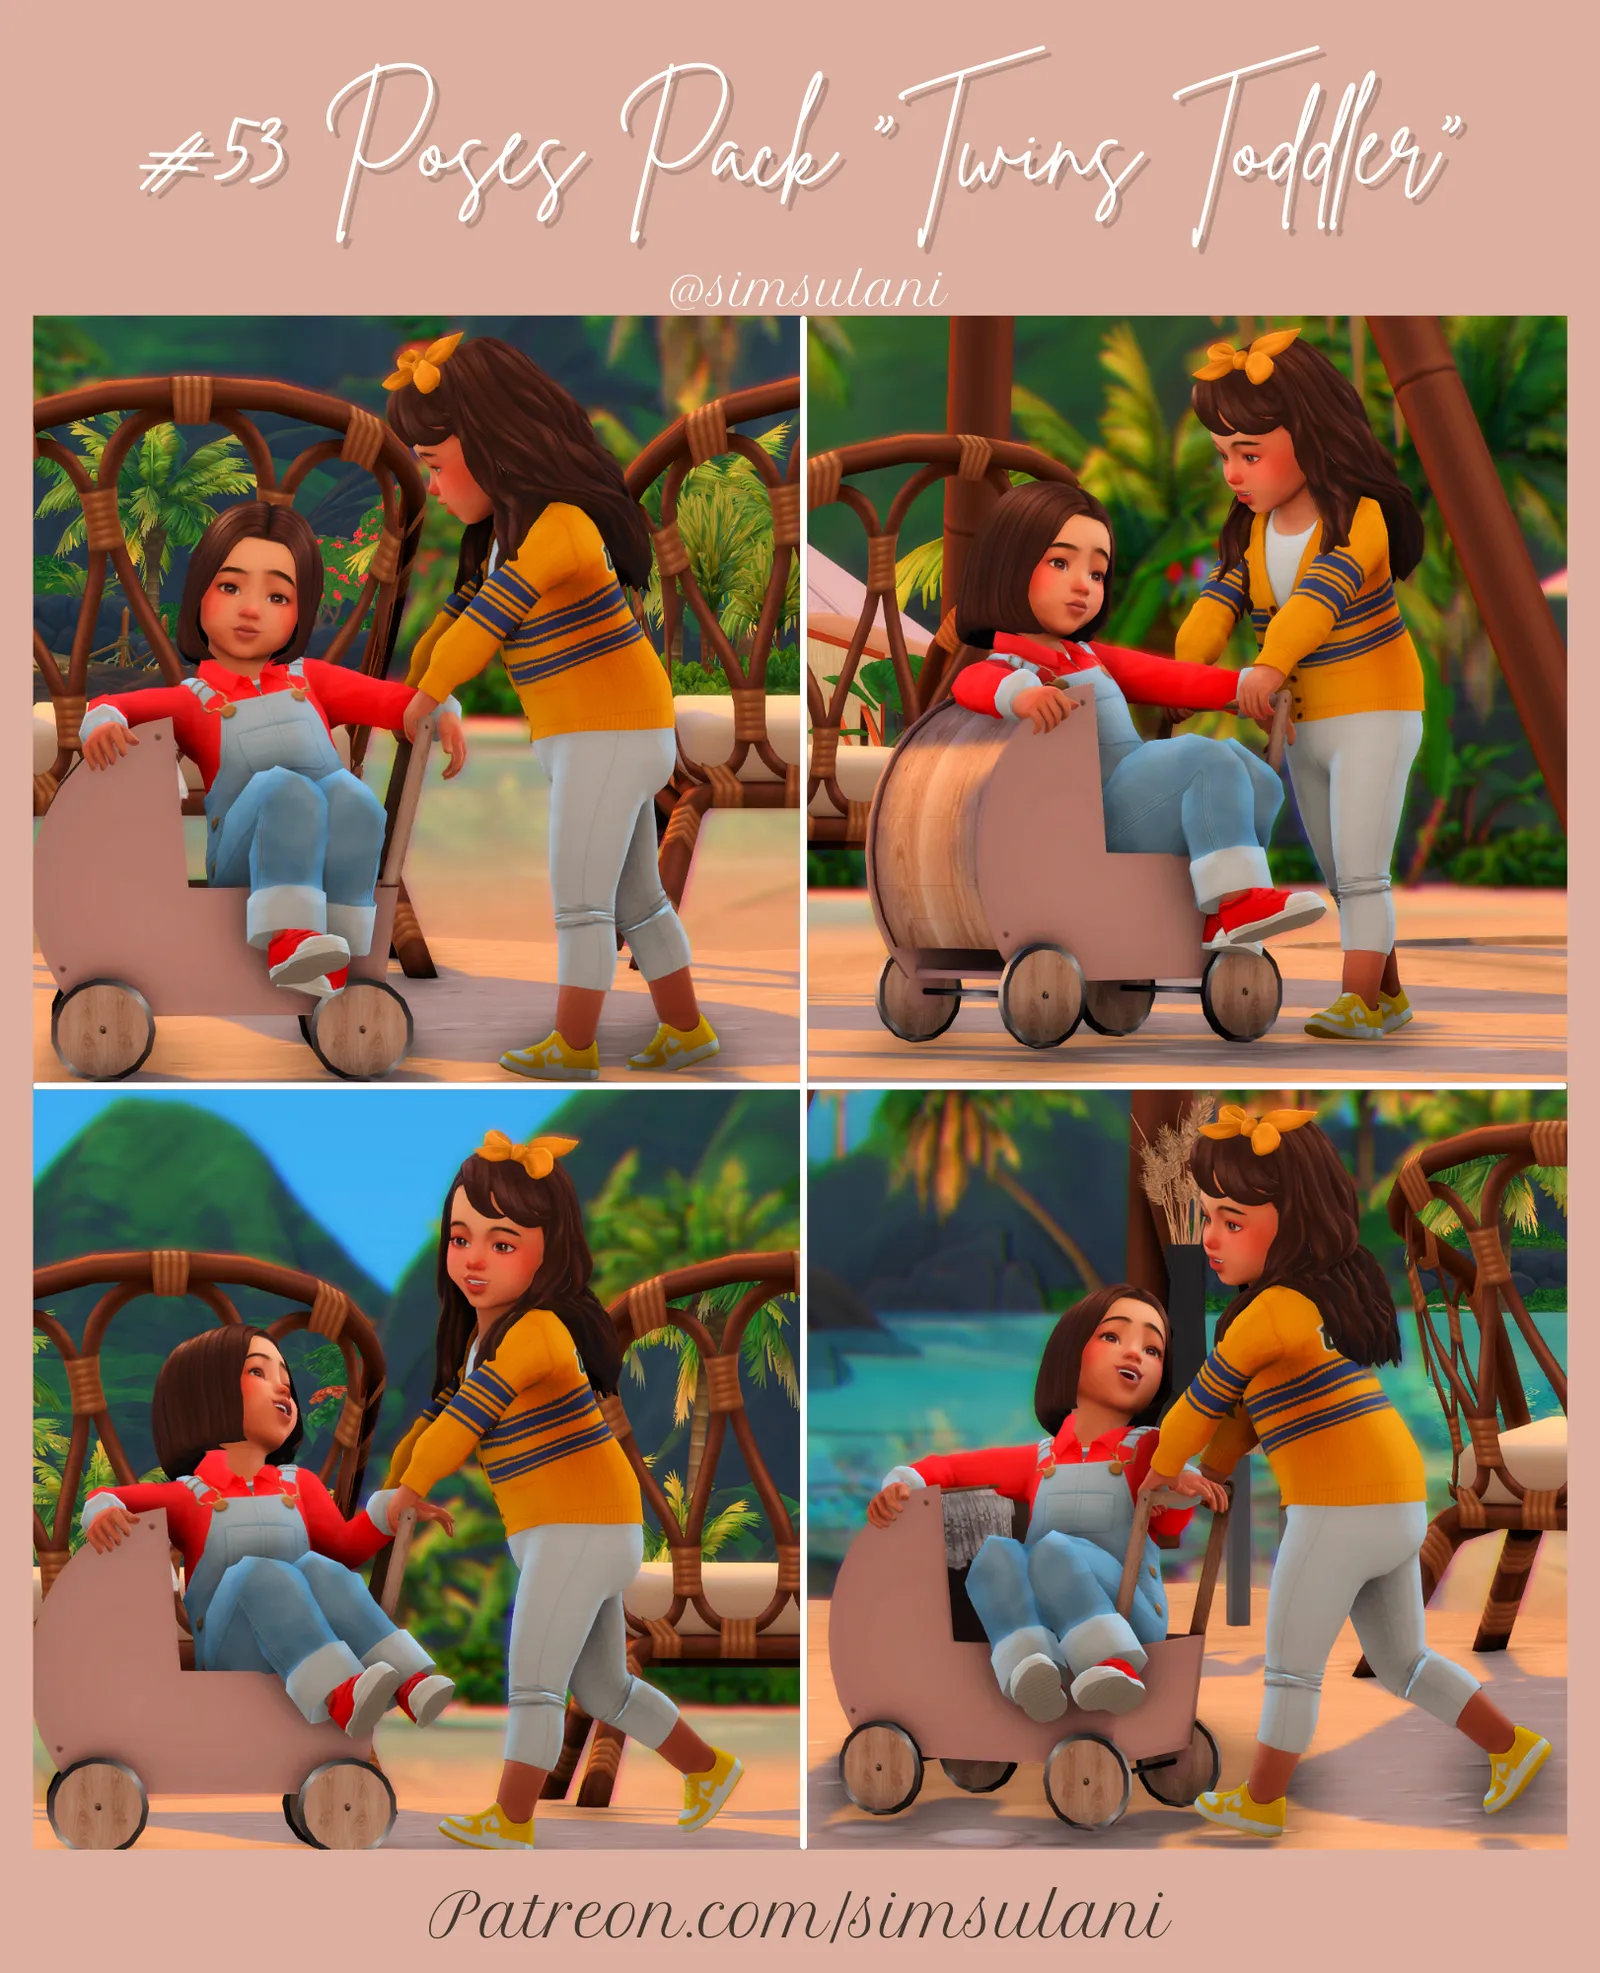 #53 POSES PACK "TWINS TODDLER" 